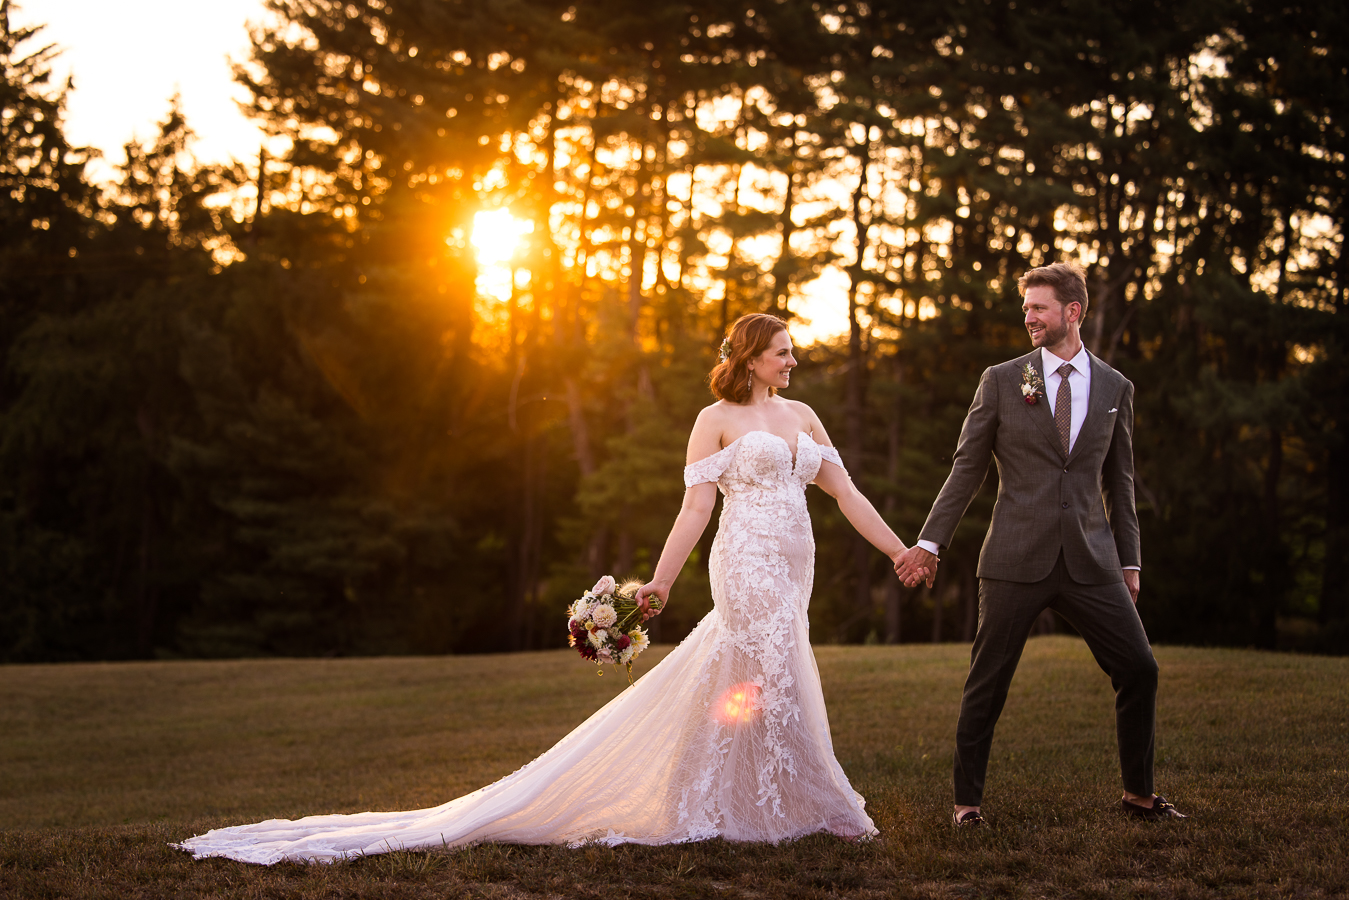 image of the bride and groom as they hold hands and walk across the open field as the golden sun is setting behind them peeking through the trees at this central pa wedding venues in warfordsburg, pa 